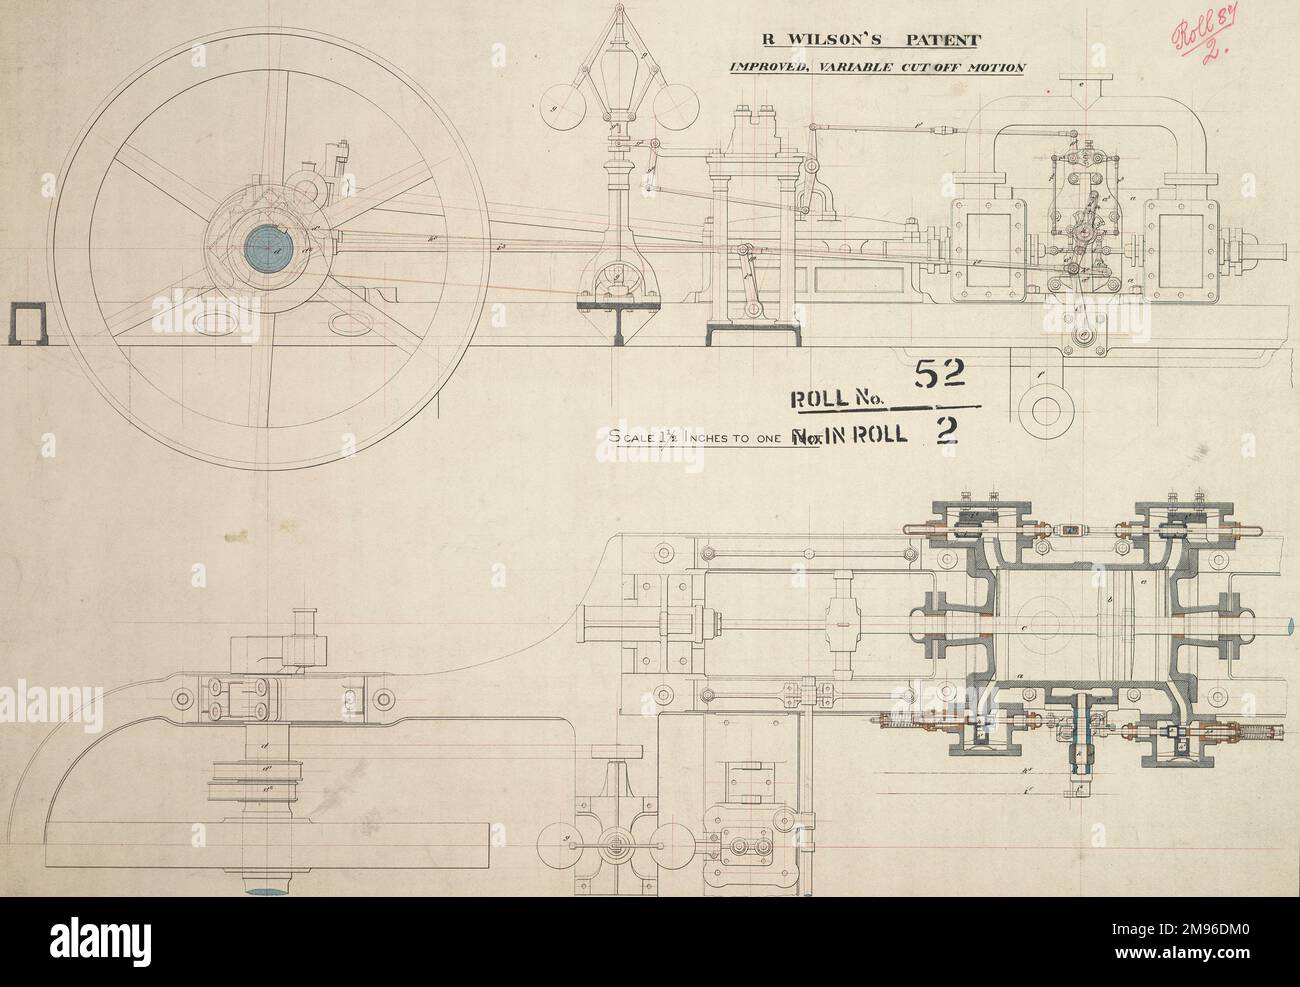 R Wilson's patent improved variable cut off motion, partial side elevation and horizontal sections Stock Photo